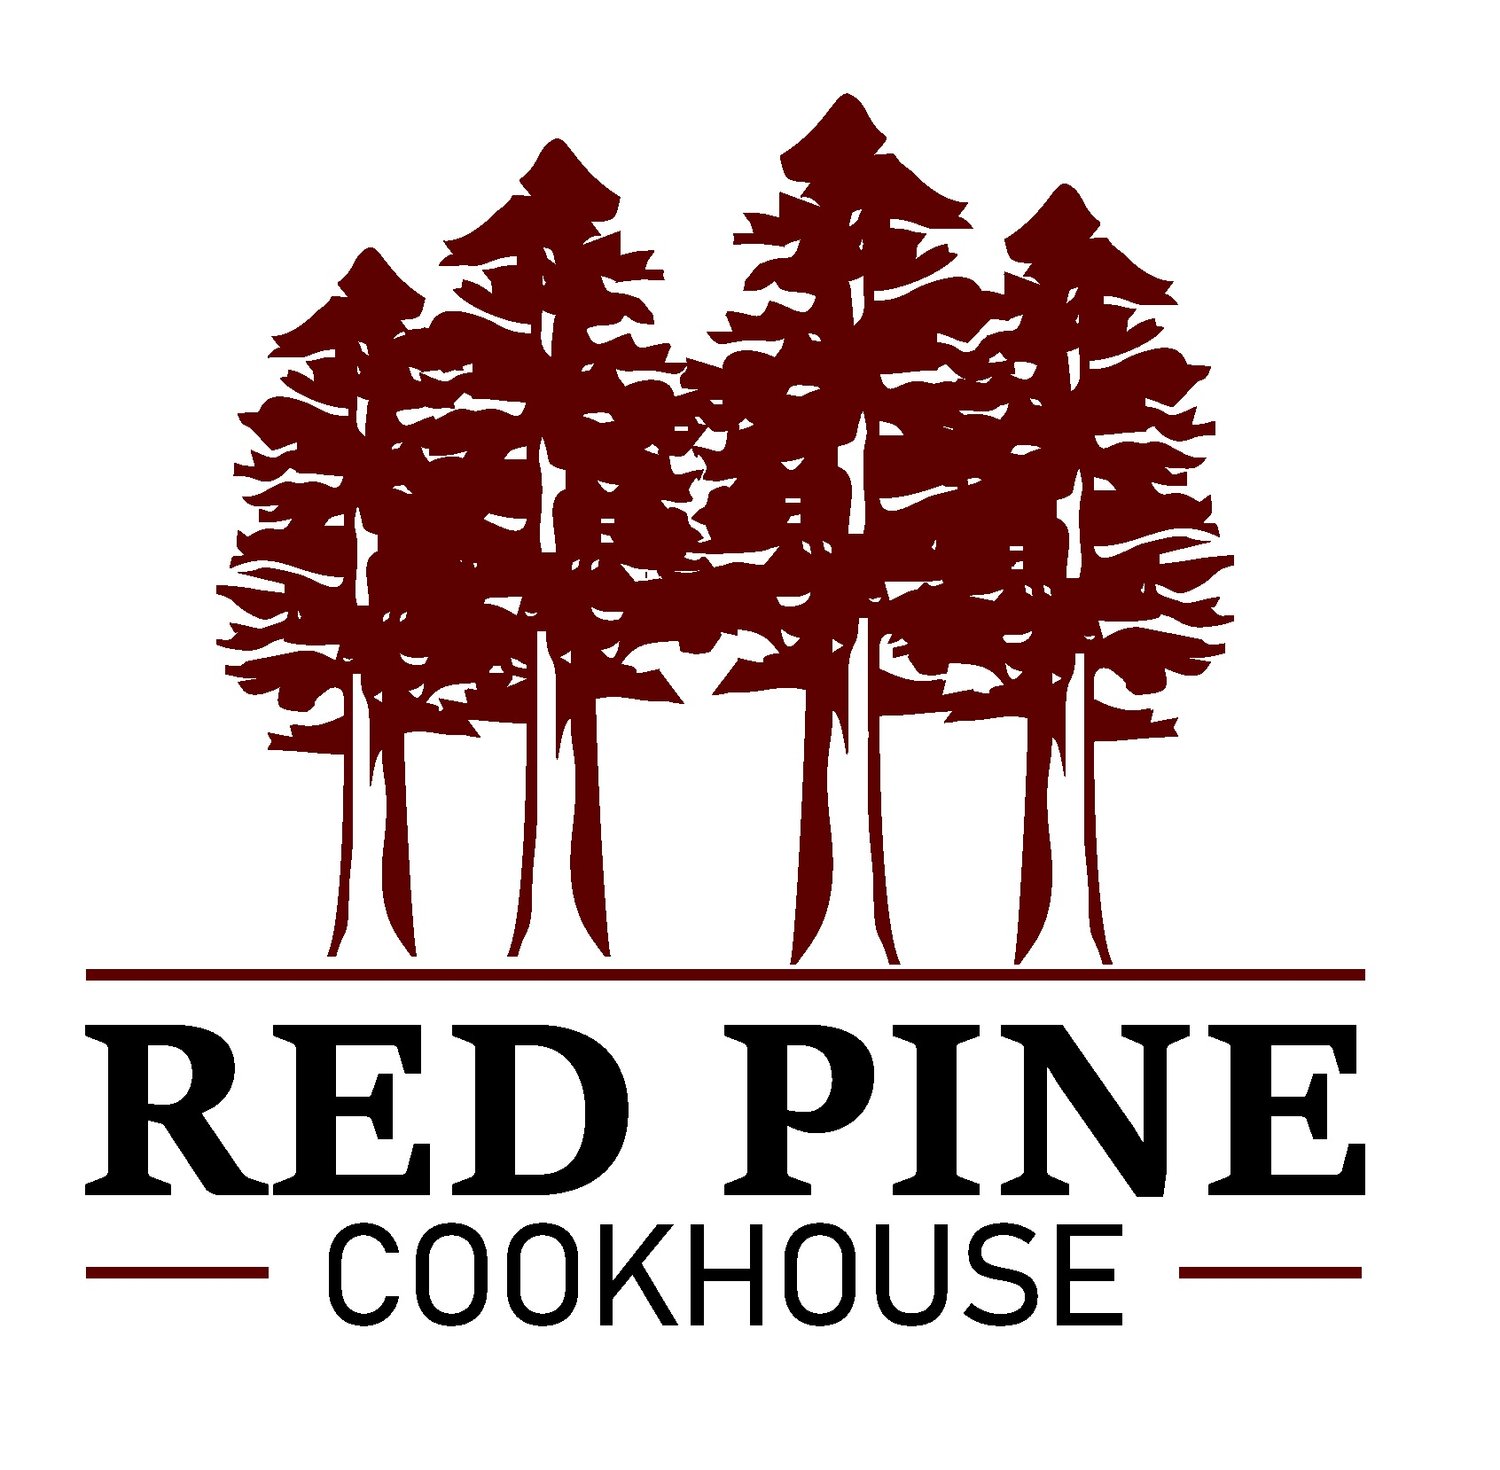 Red Pine Cookhouse